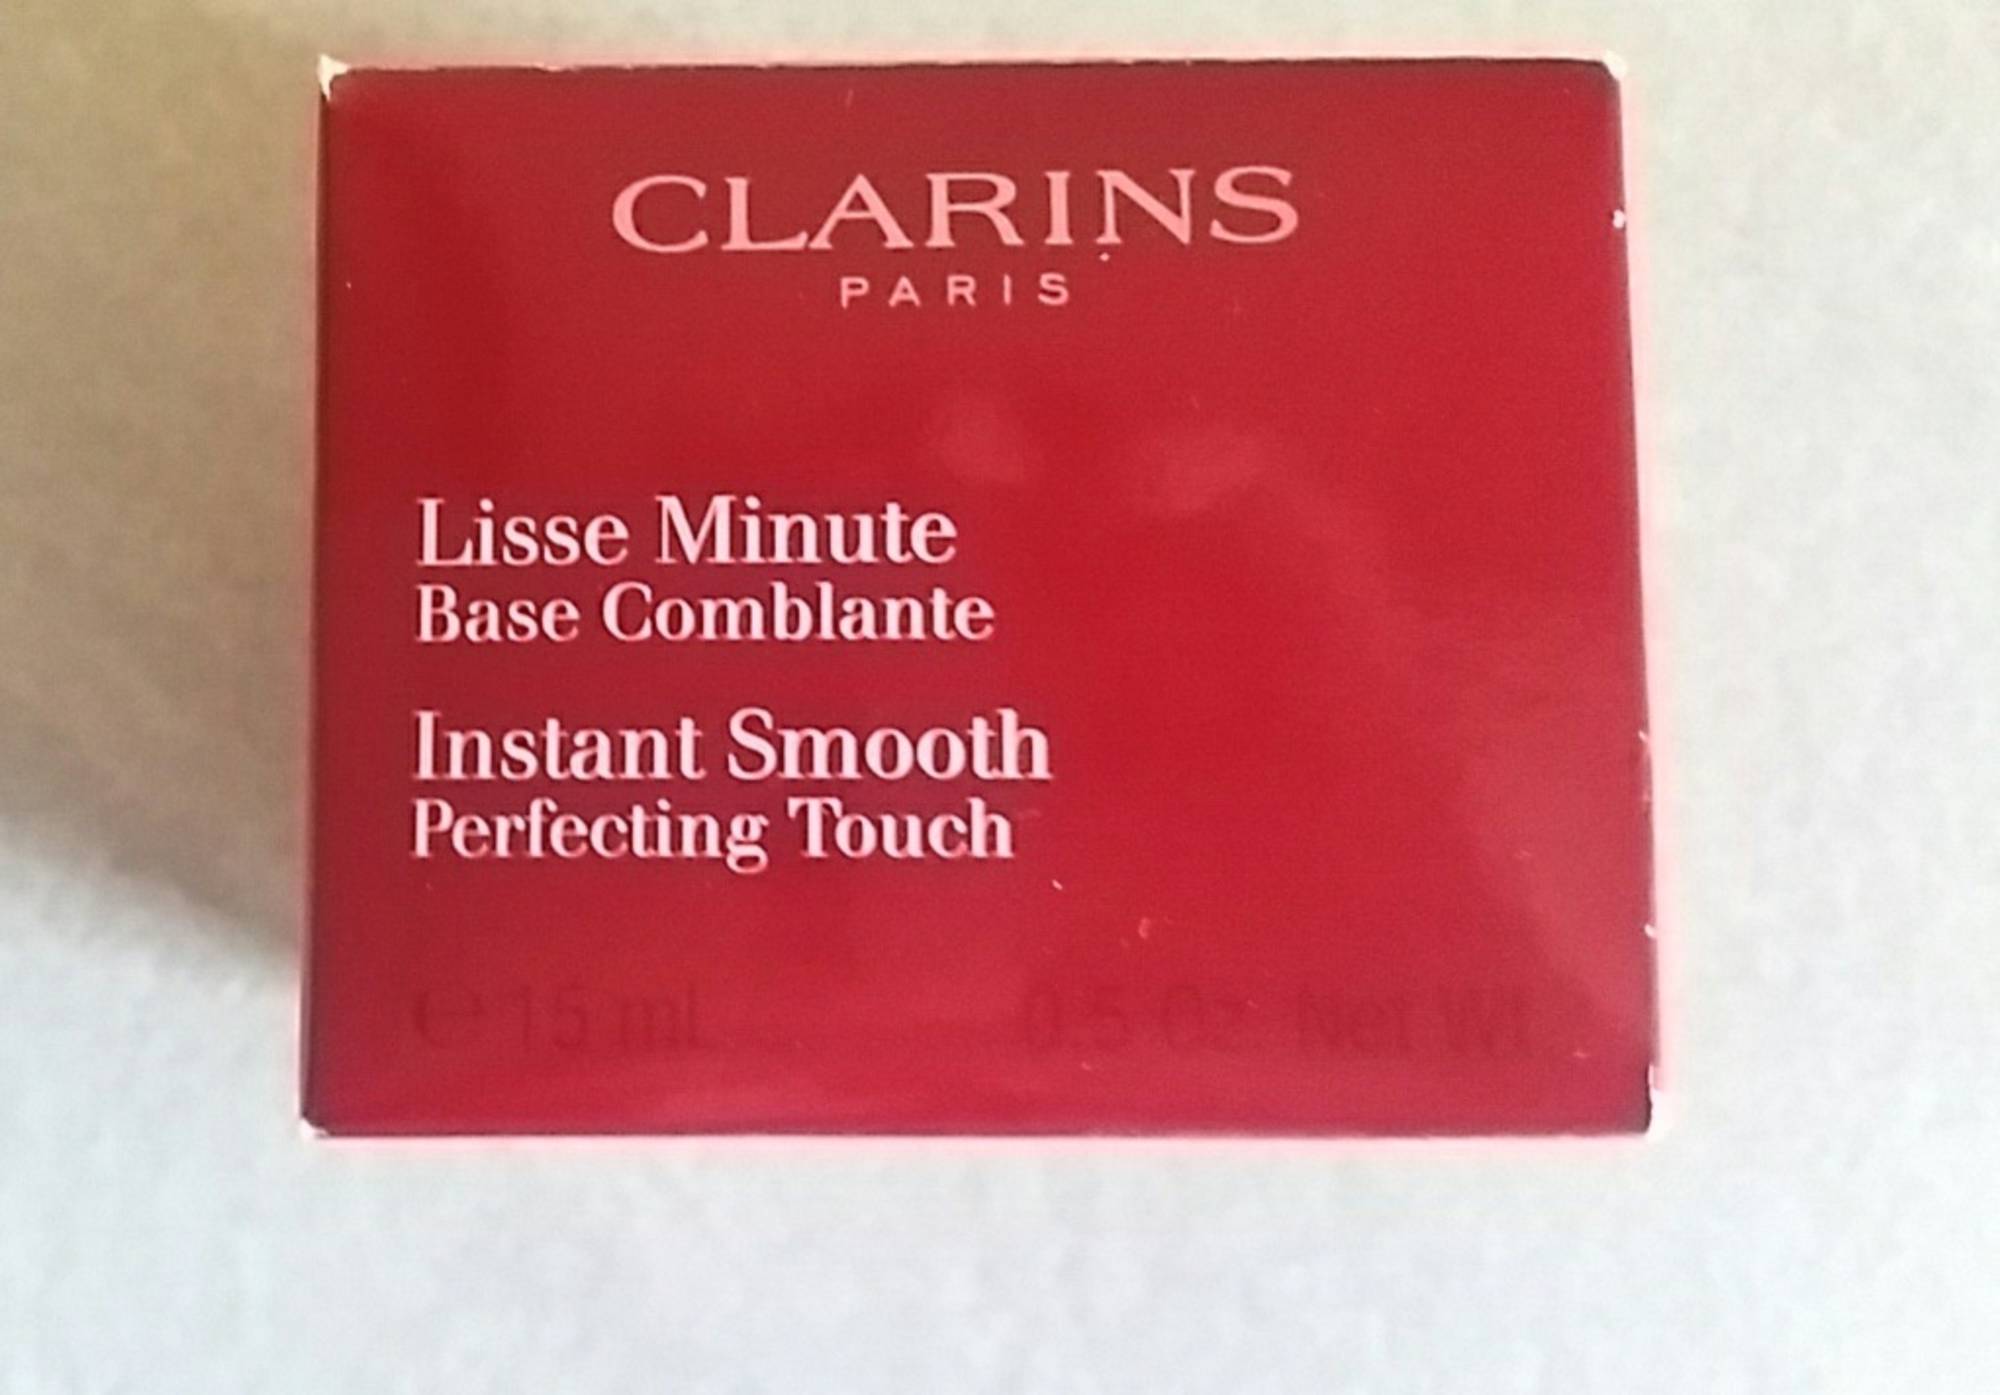 CLARINS - Lisse Minute - Base comblante